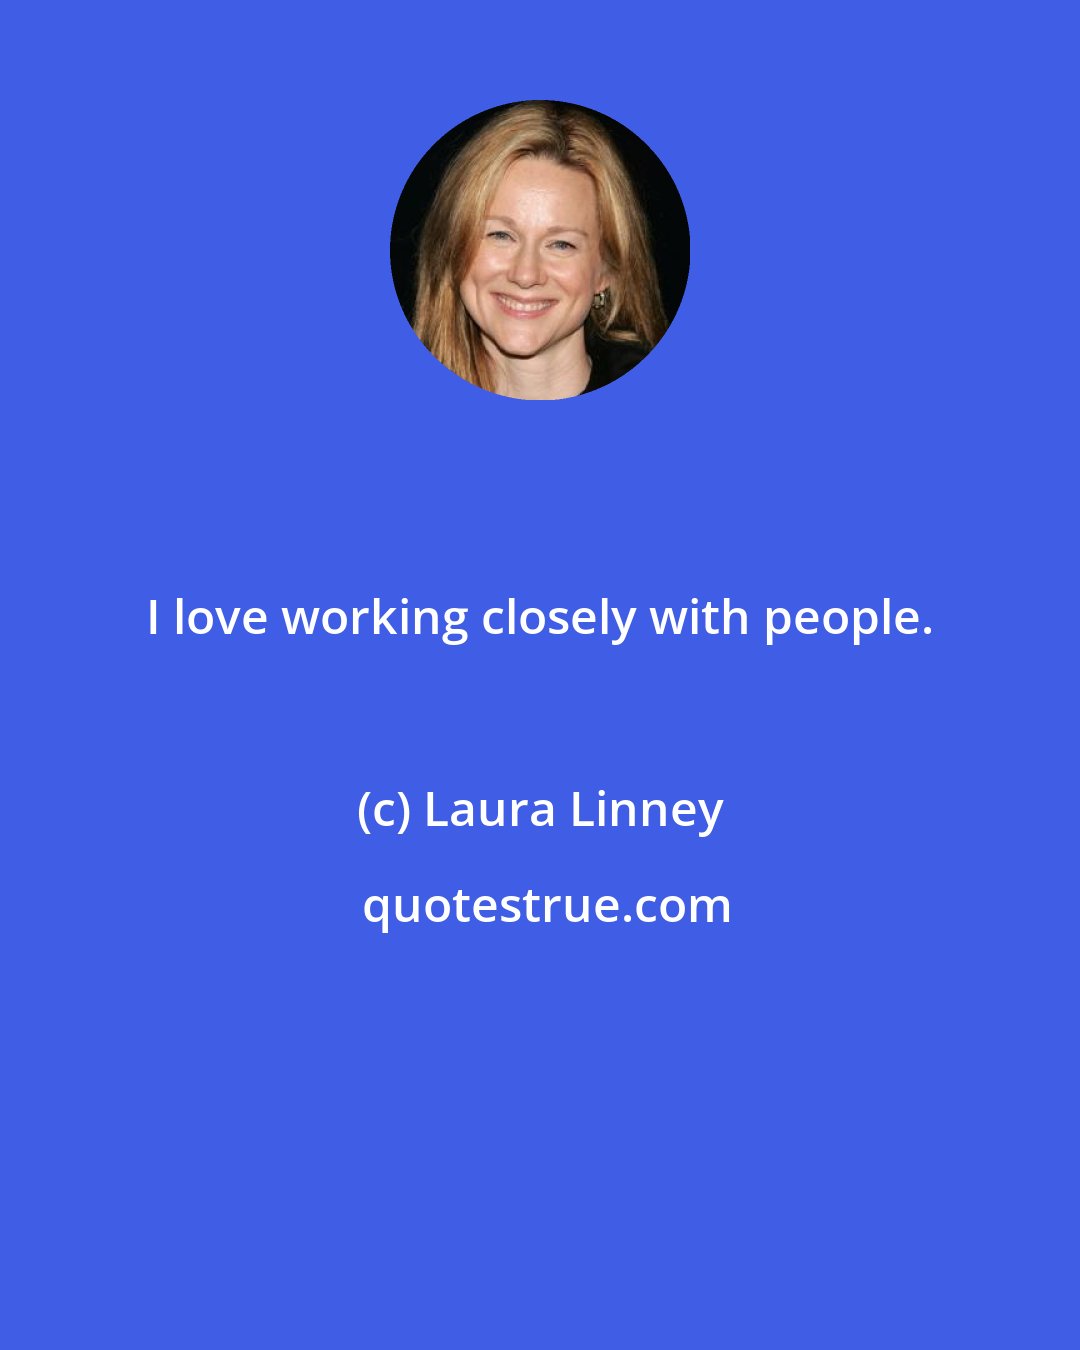 Laura Linney: I love working closely with people.